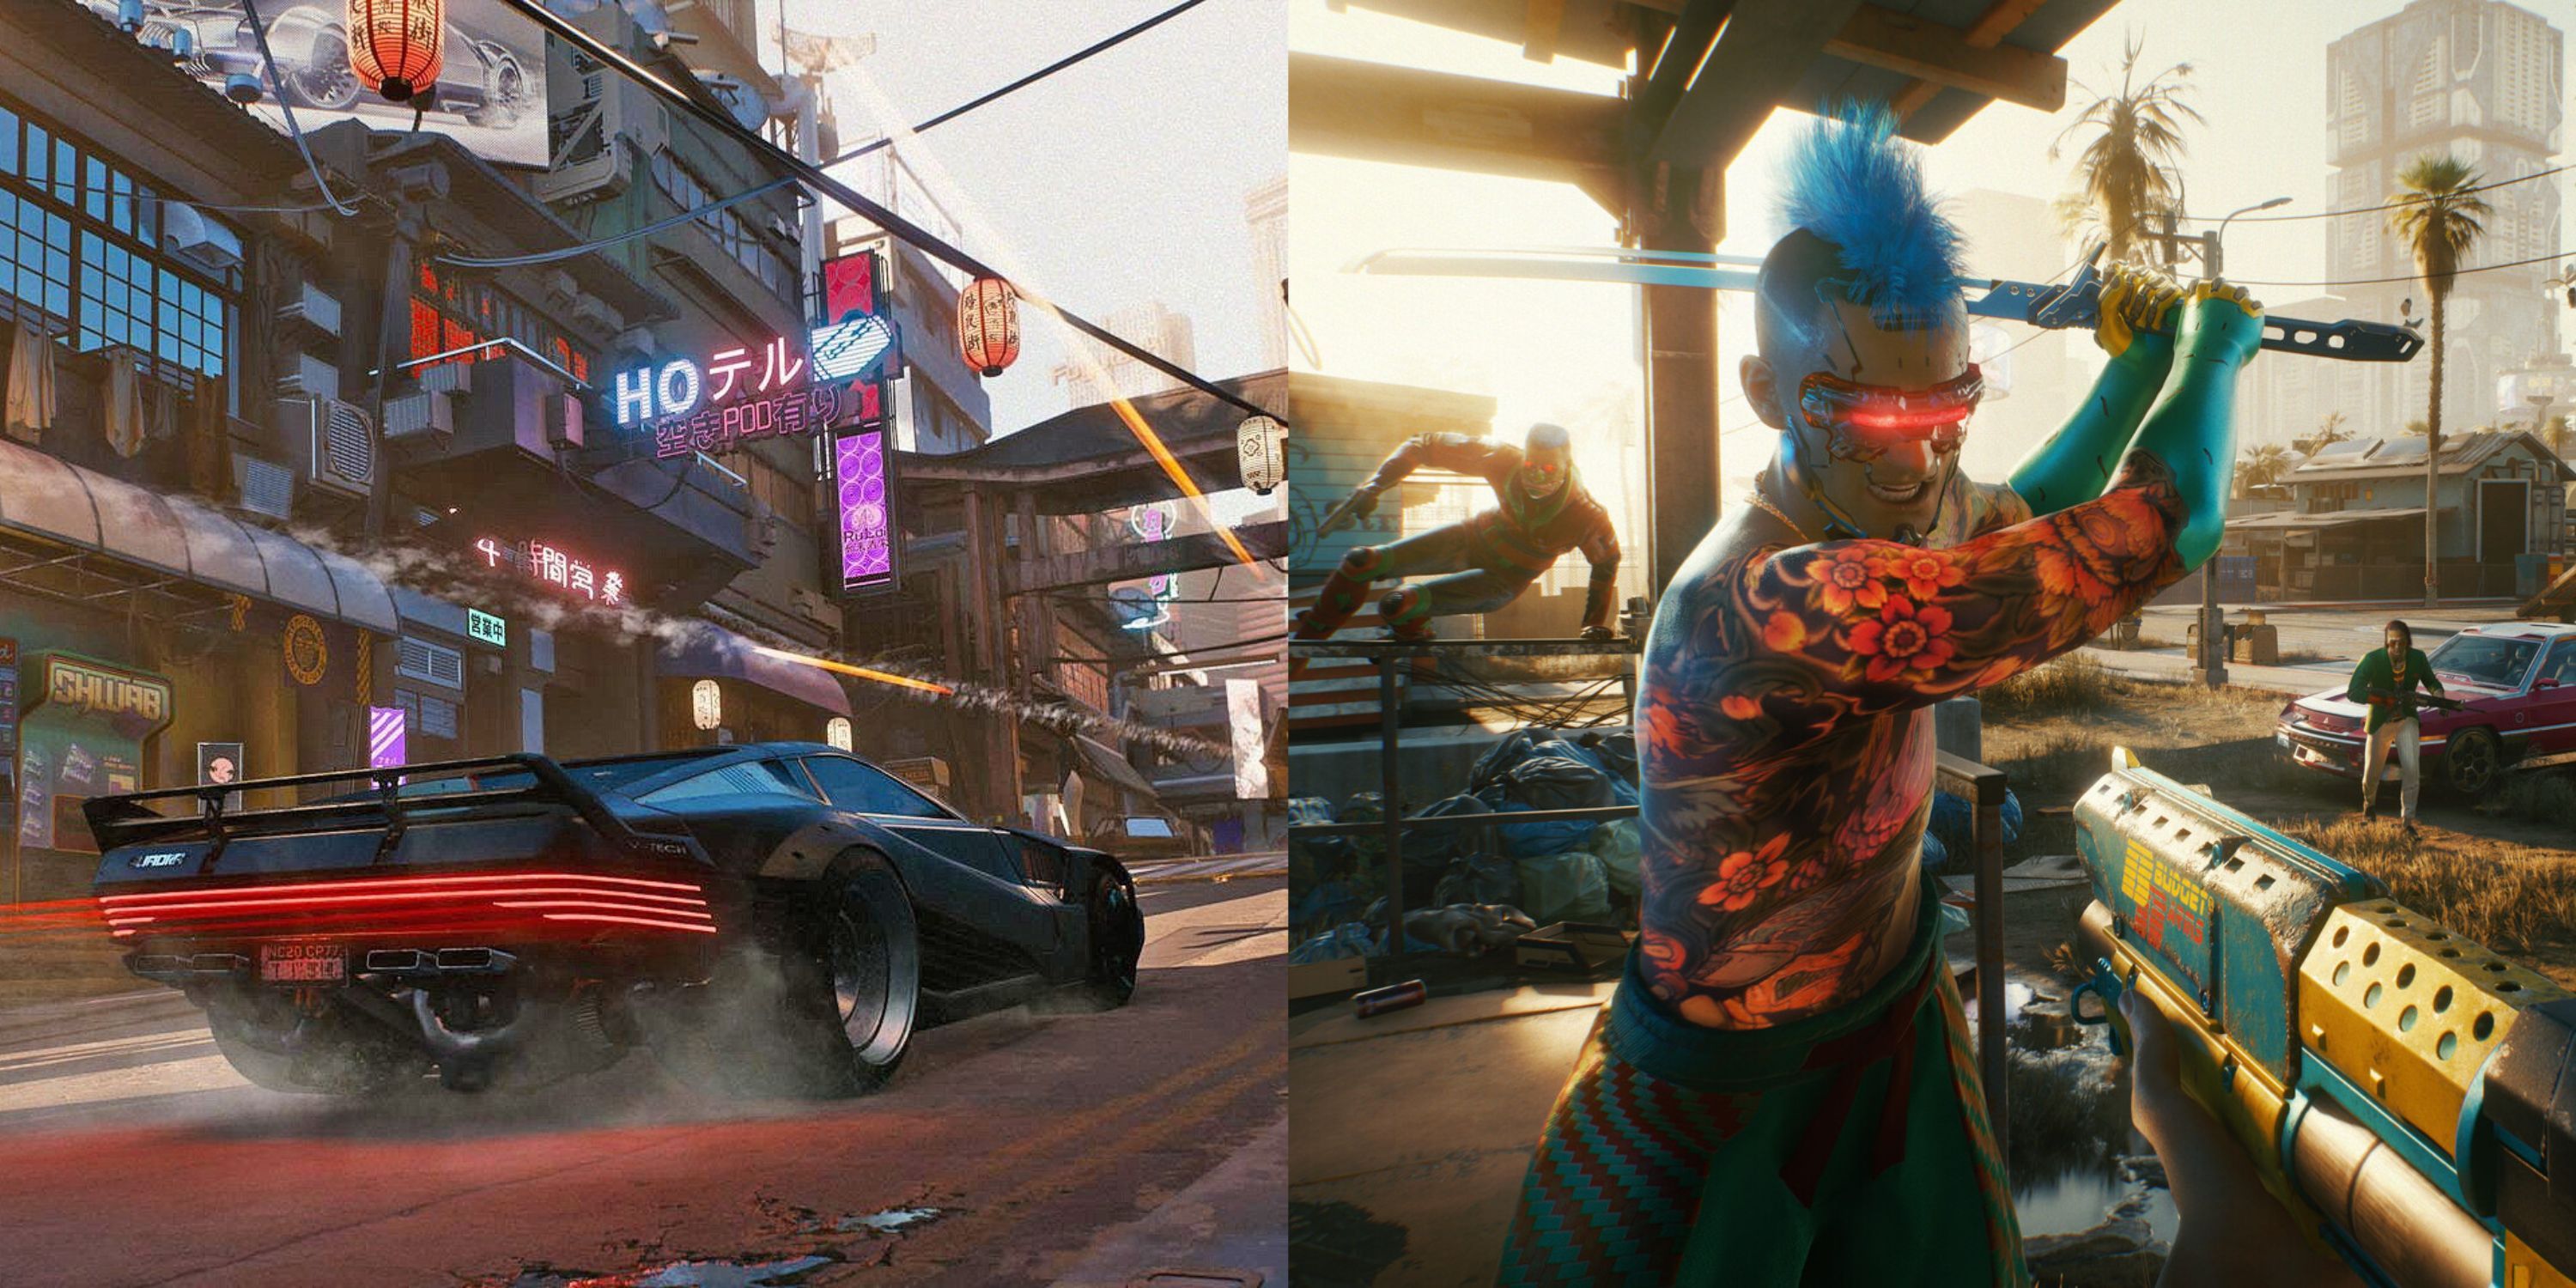 Featured image vehicles in Night City and a character wielding a blade in Cyberpunk 2077